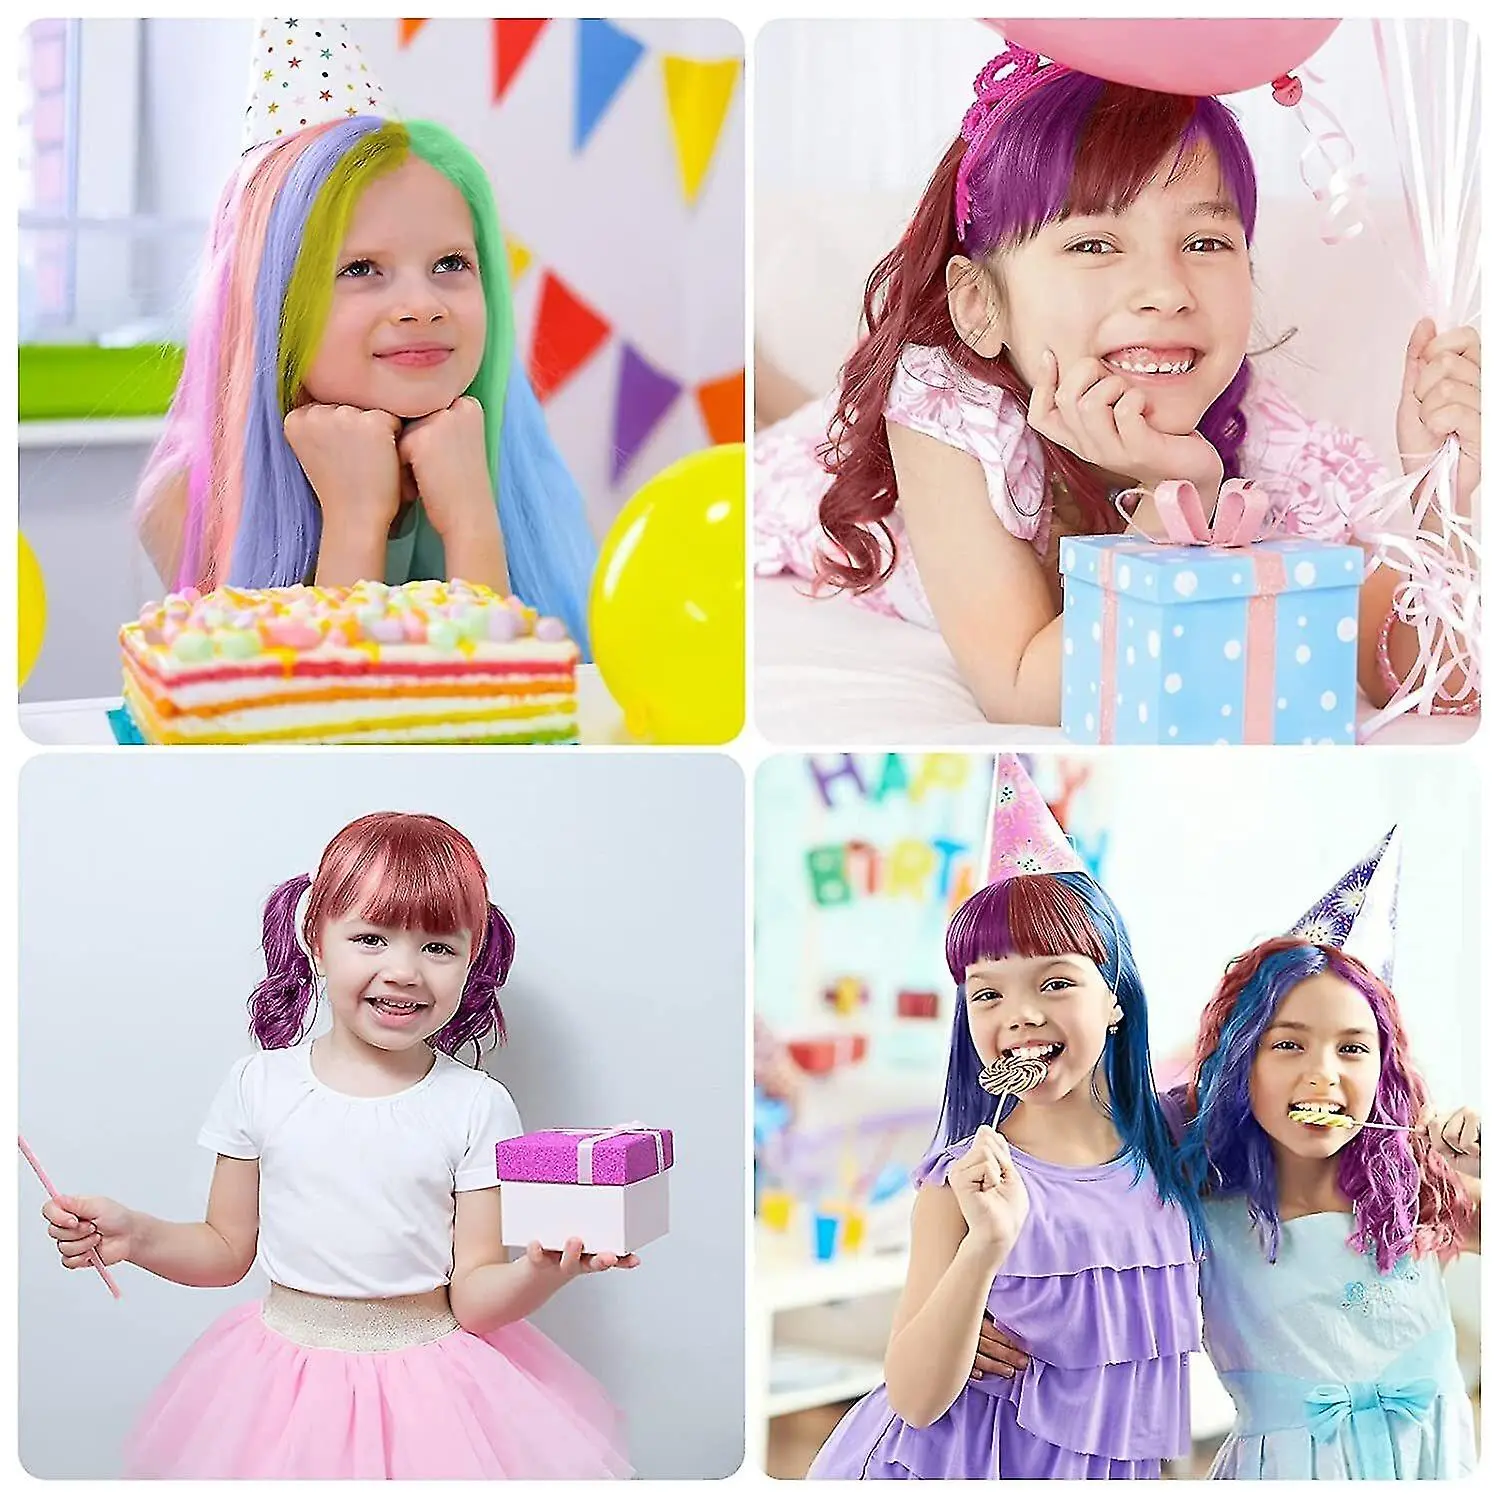 Transform Your Kid's Look with Vibrant Children's Hair Chalk - Easy to Apply and Wash Out!